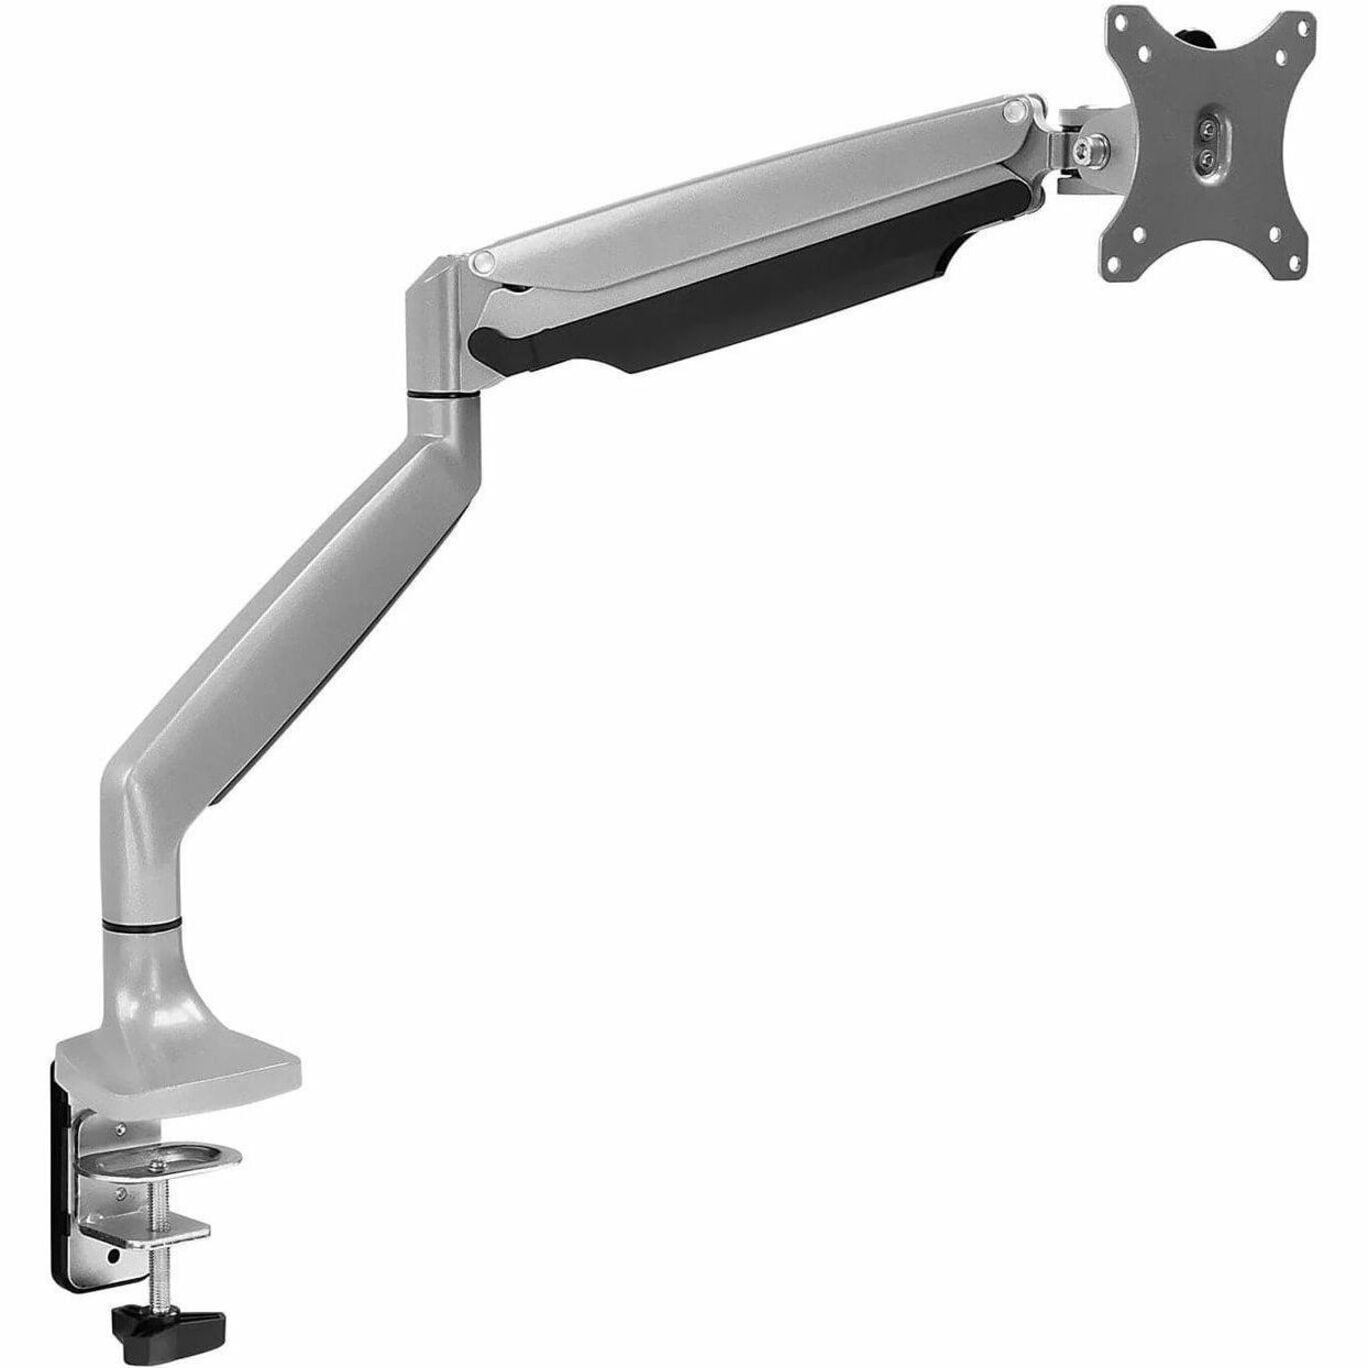 Mount-It Mounting Arm for Monitor, LCD Display, LED Display - Silver (mi-1771s)